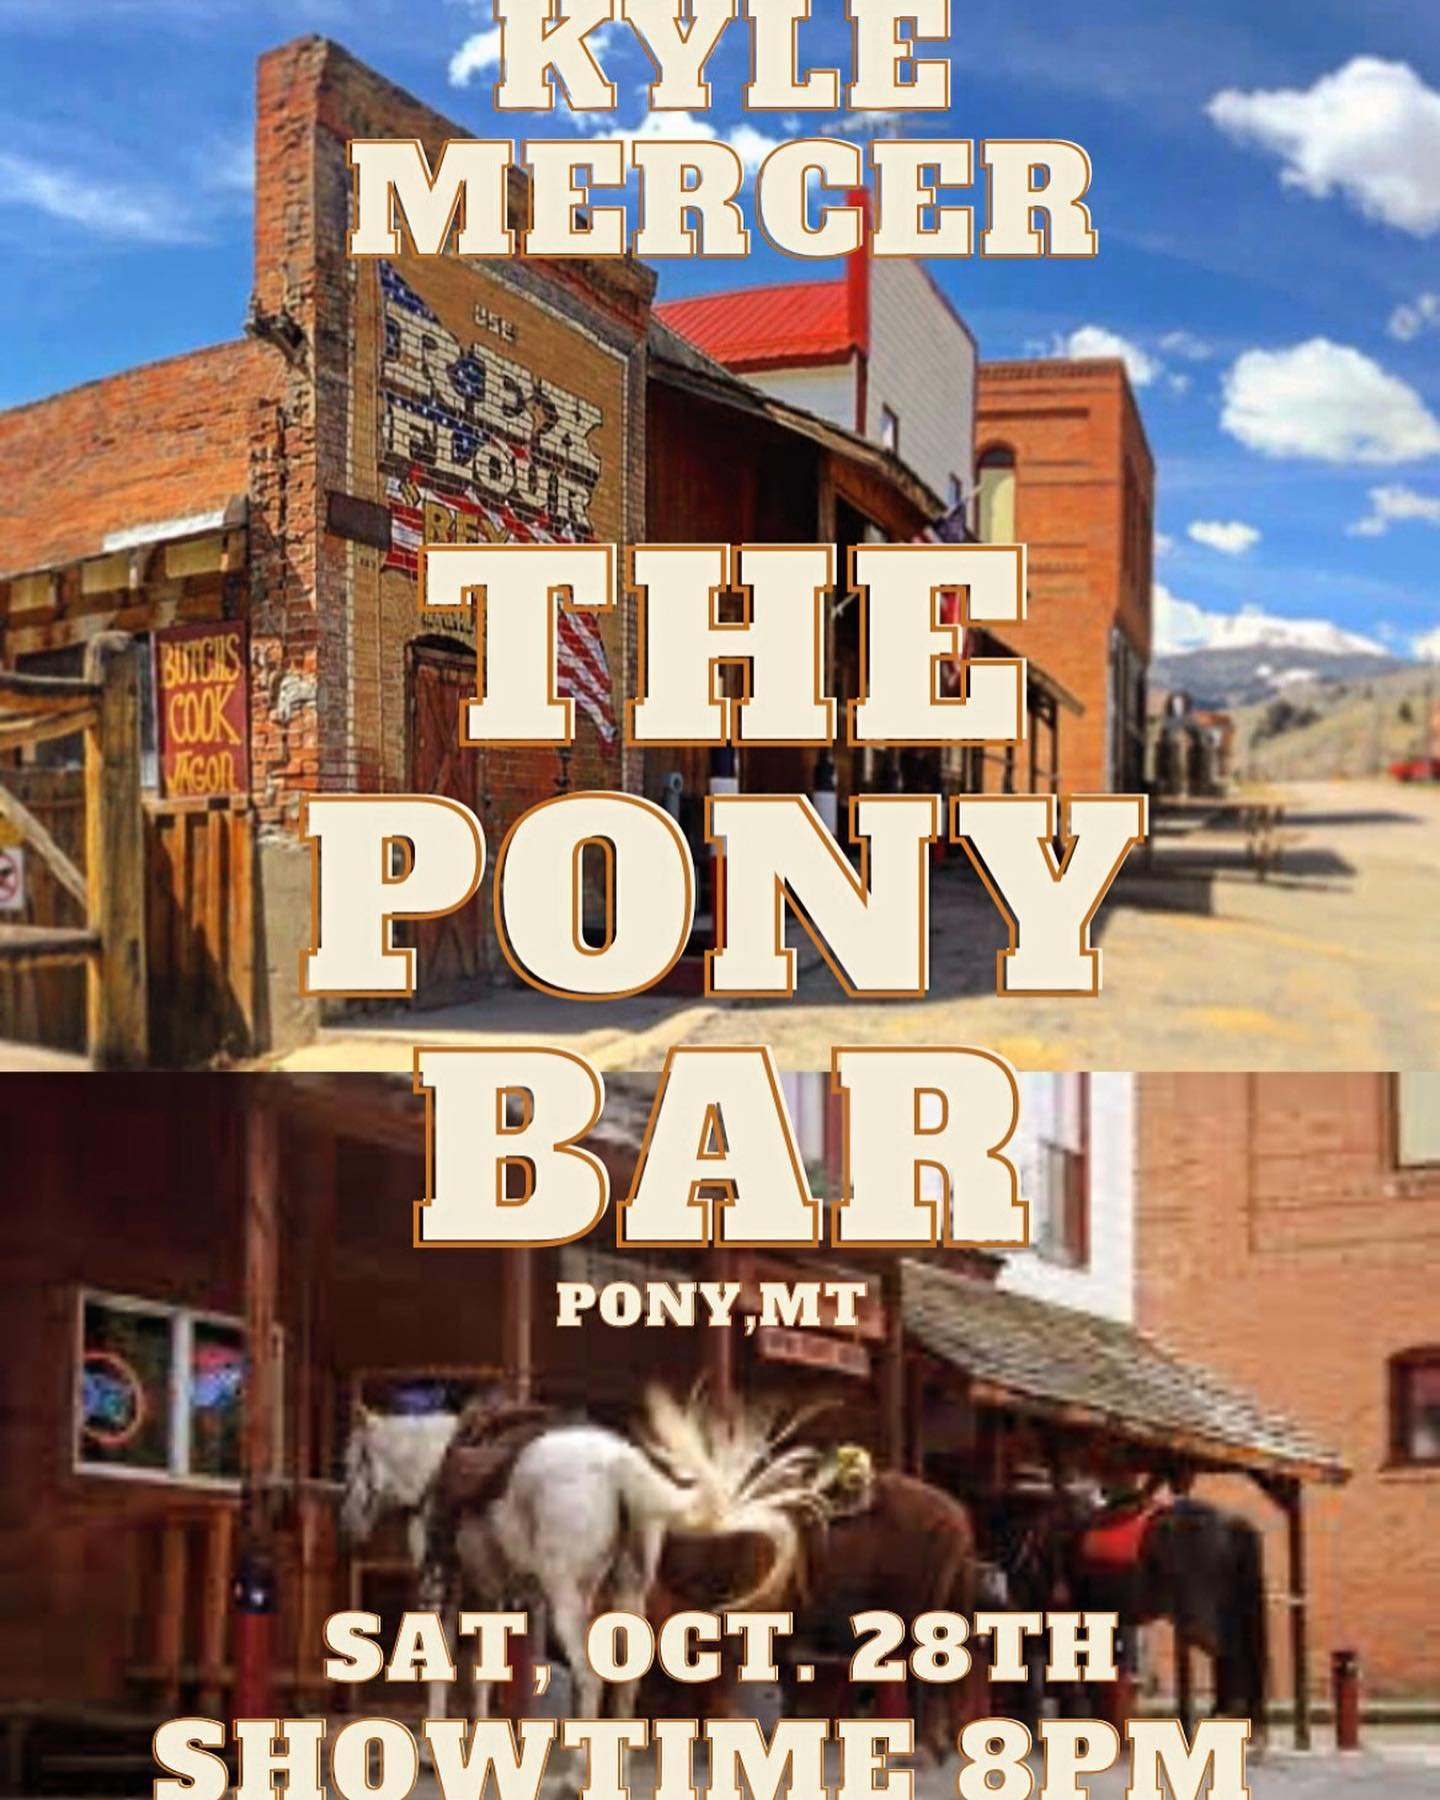 It&rsquo;s official! I&rsquo;ll be playing for my very first time in the great state of Montana @montana_ponybar 🎶 I hope to see y&rsquo;all there! 
#montanamusicscene #countrymusic #kylemercermusic #livemusic #musicartist #songwriter #montana